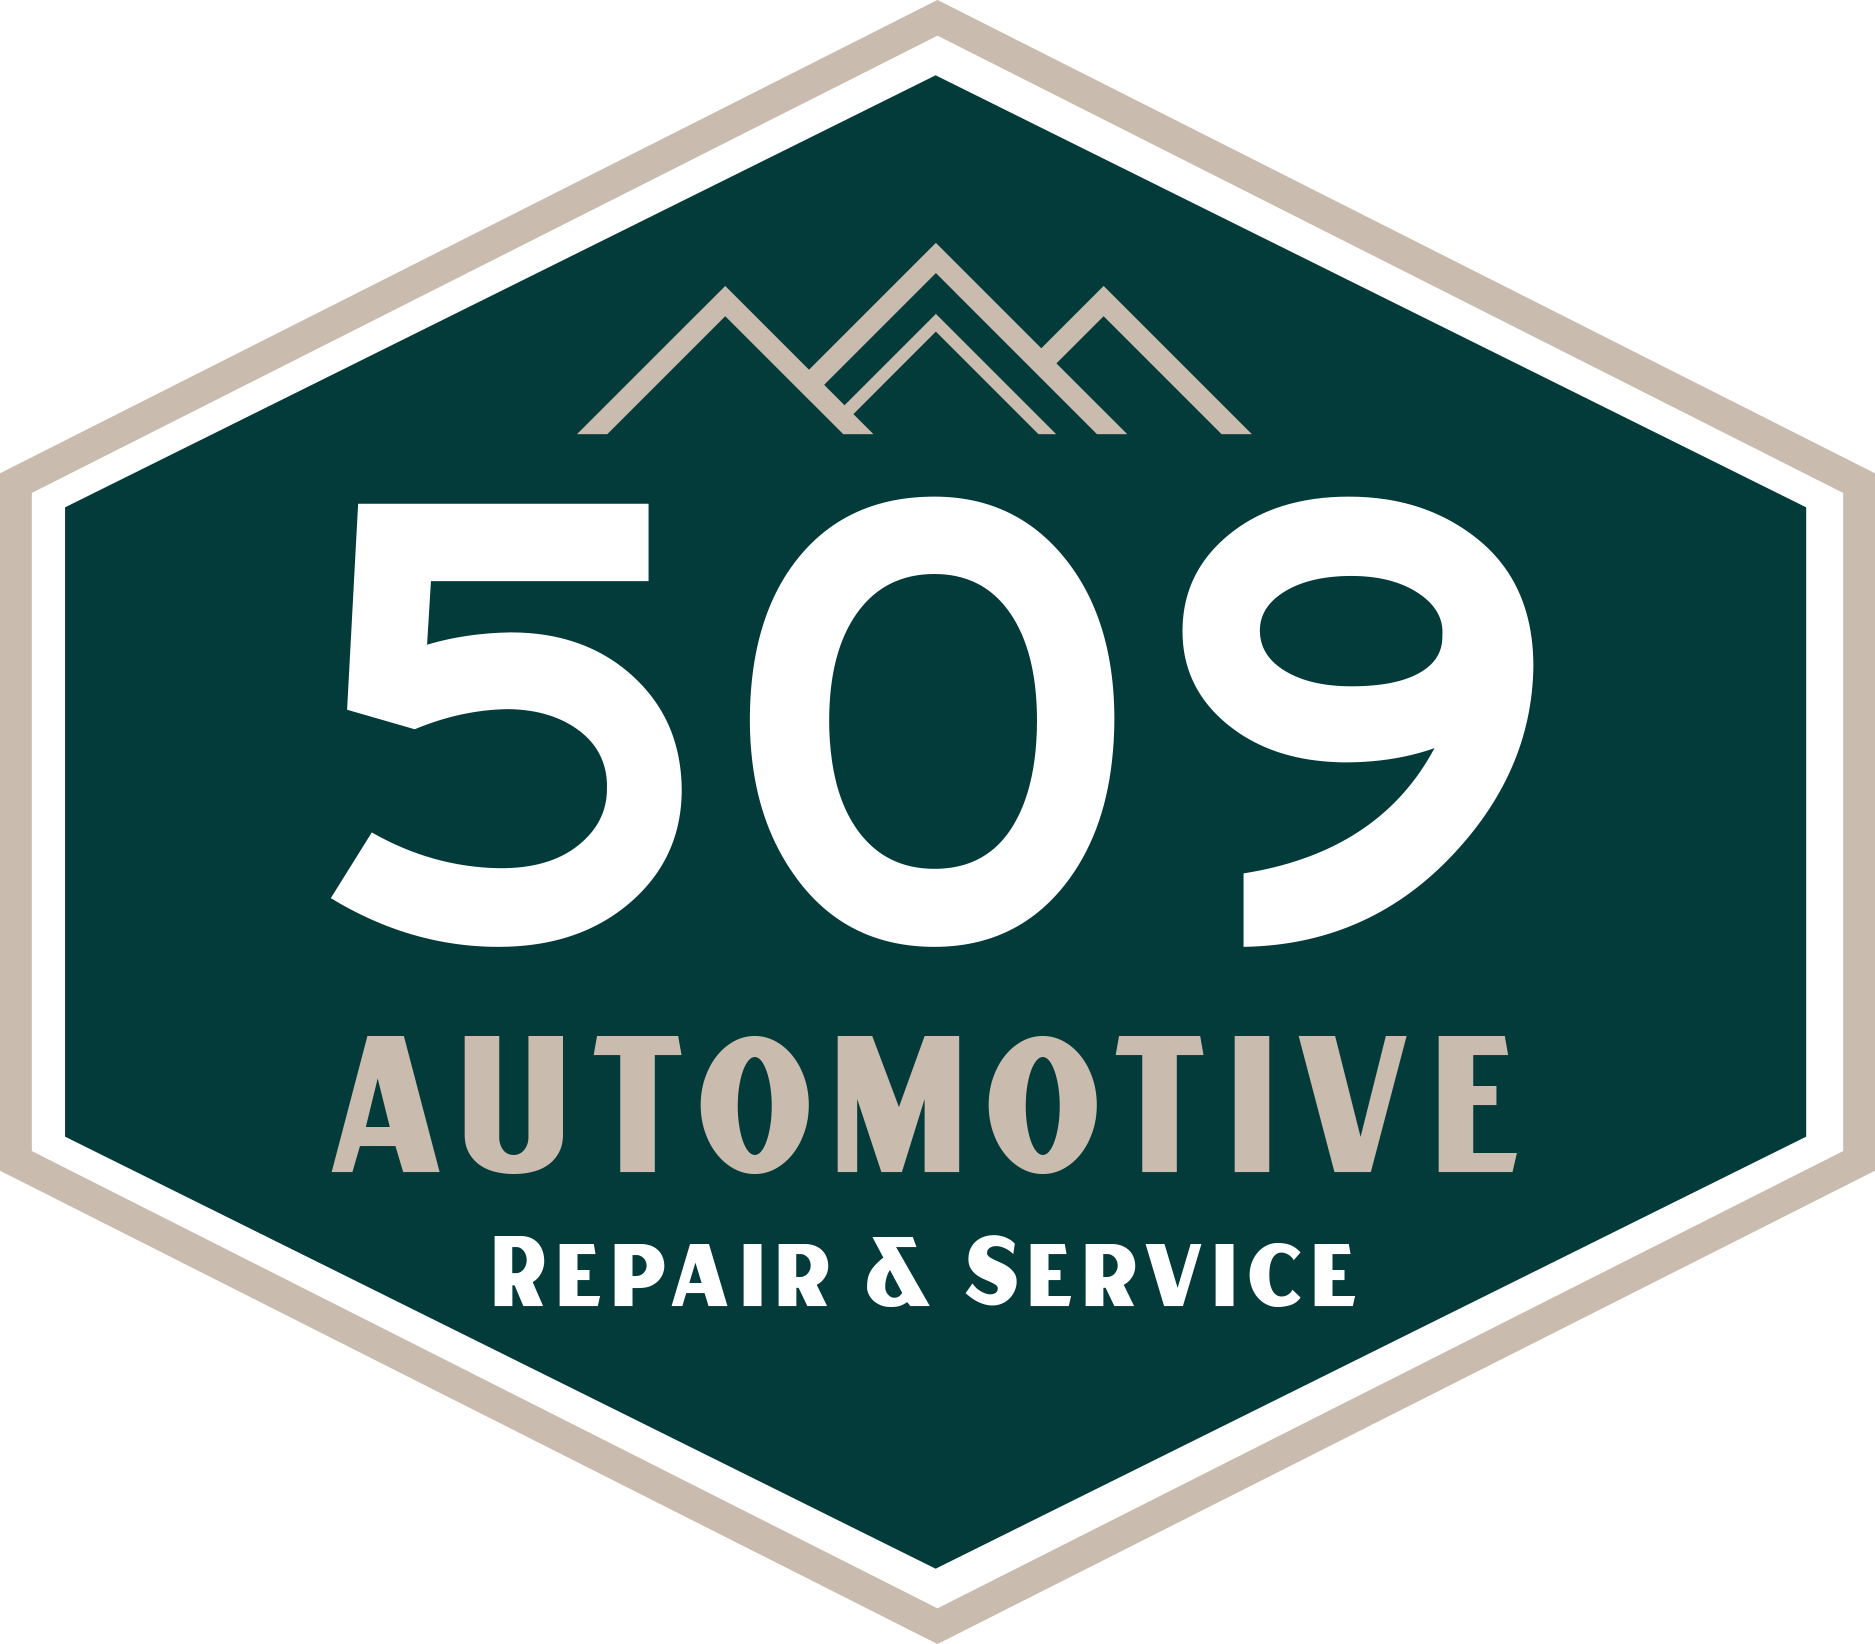 Take Care of All Your Car at 509 Automotive!